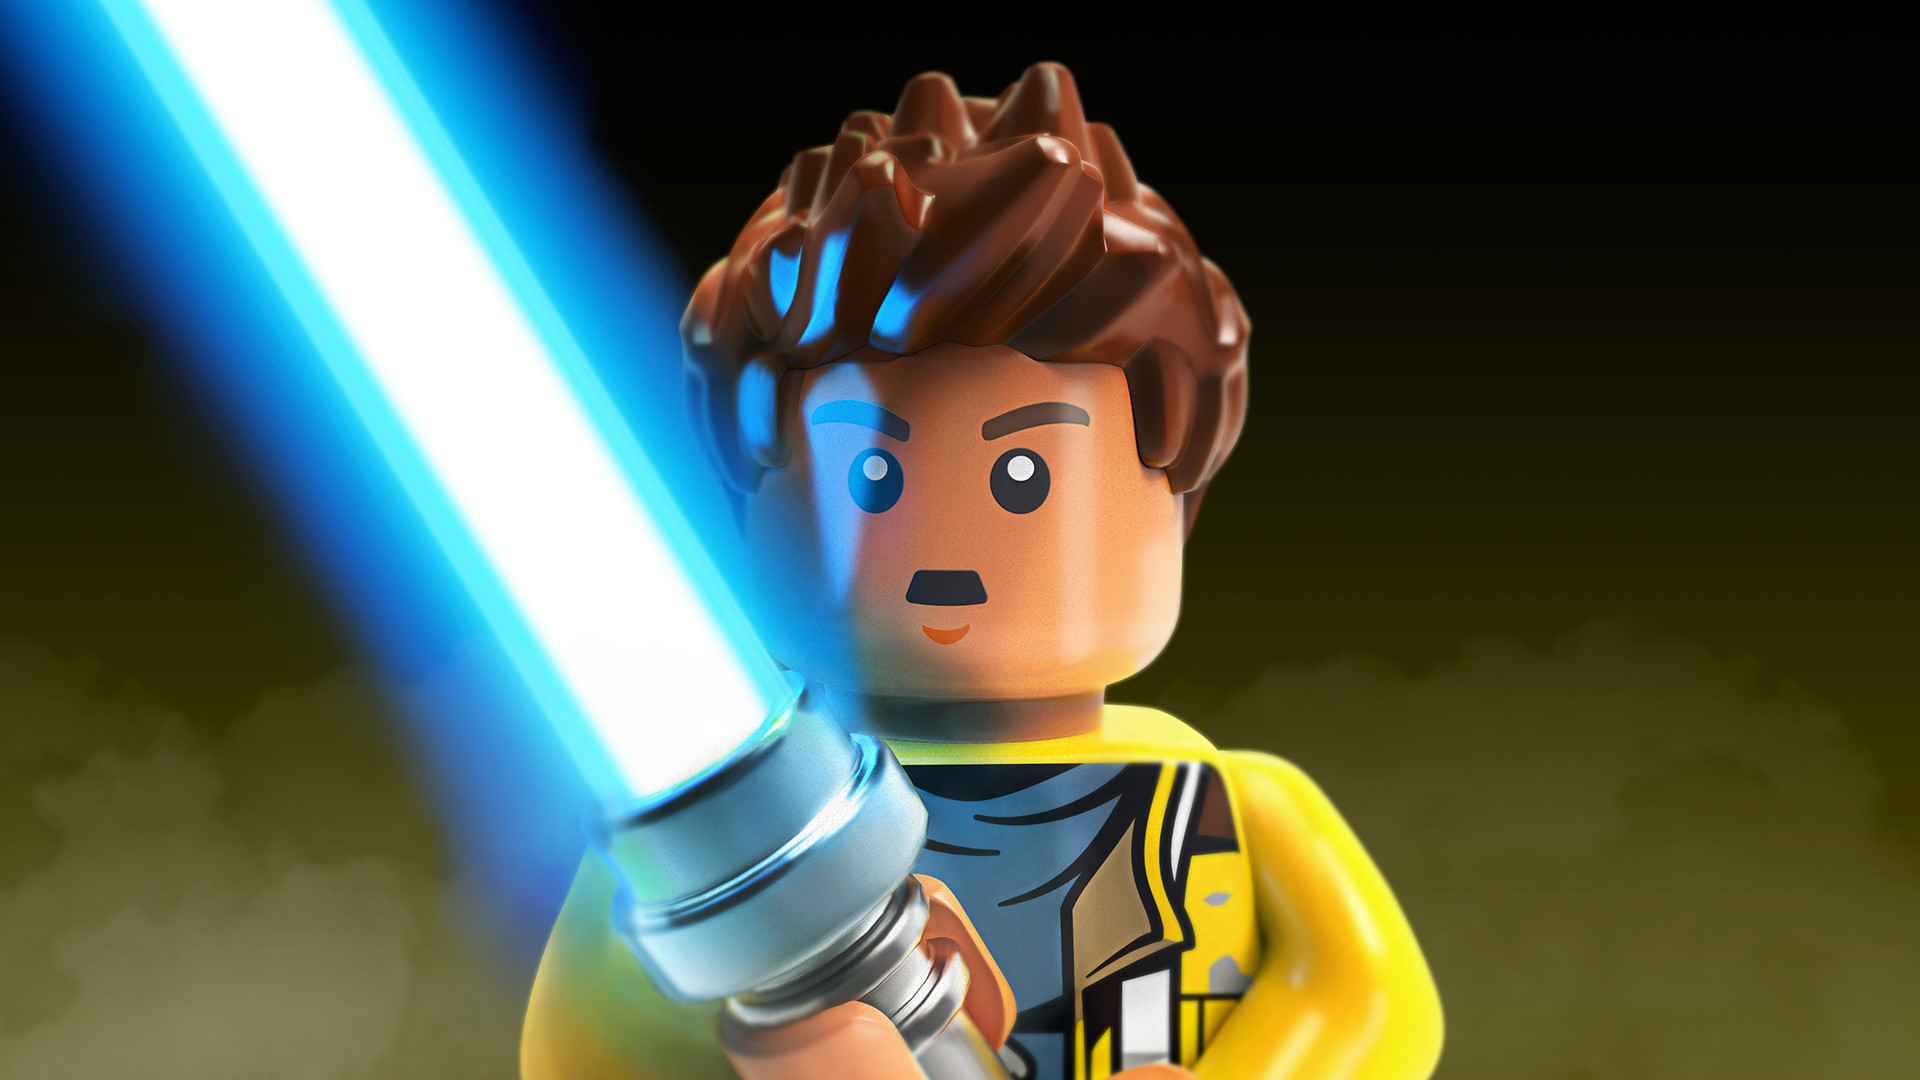 LEGO Star Wars: The Force Awakens - The Freemaker Adventures Character Pack DLC Steam CD Key 1.68 $